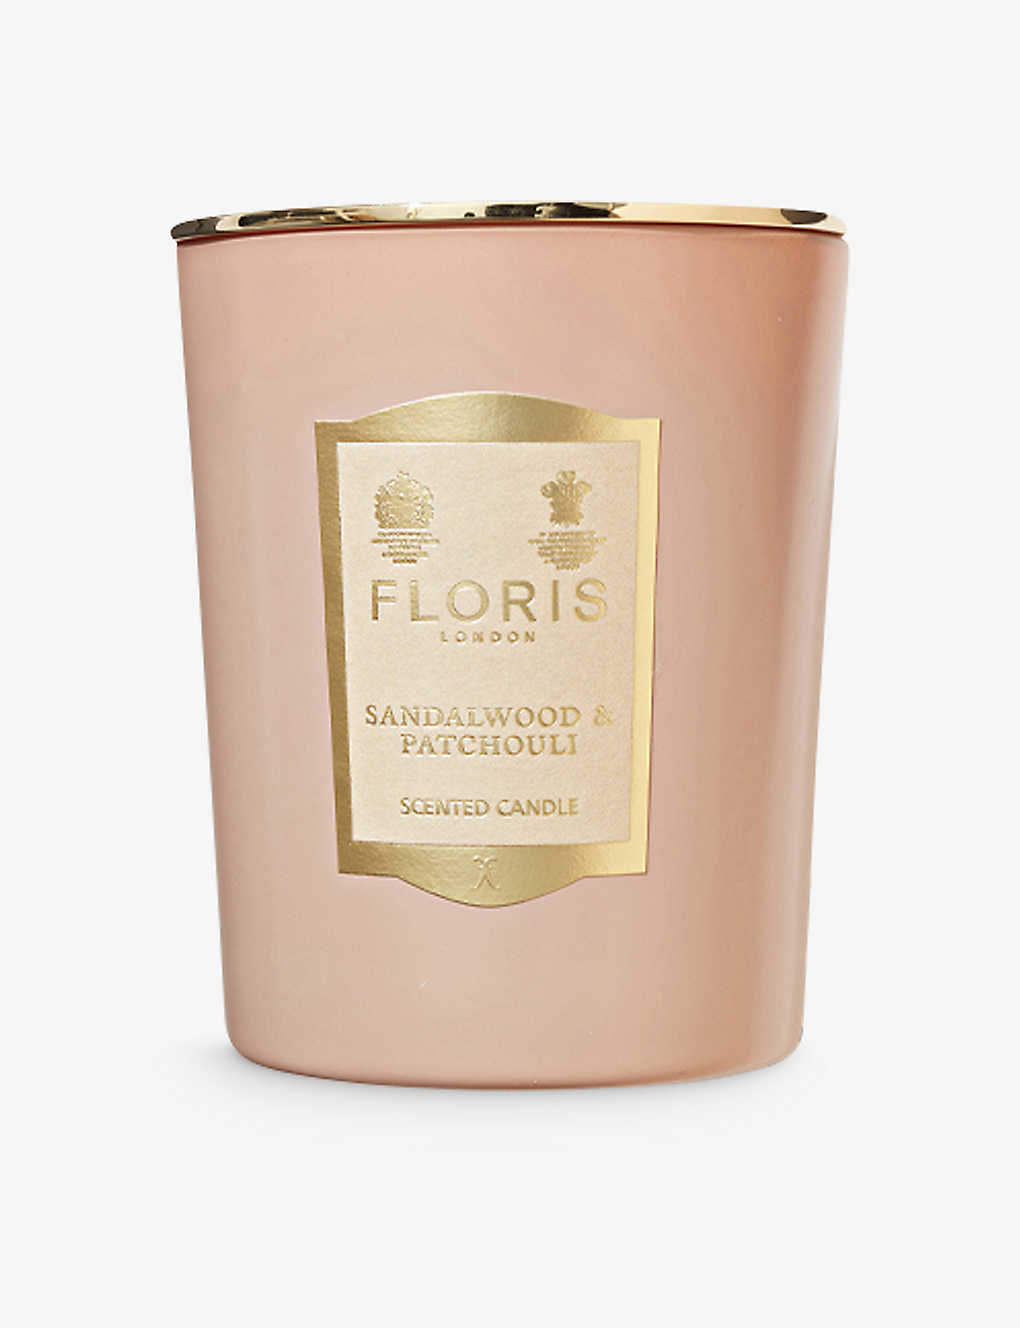 Floris Sandalwood And Patchouli Scented Candle 175g